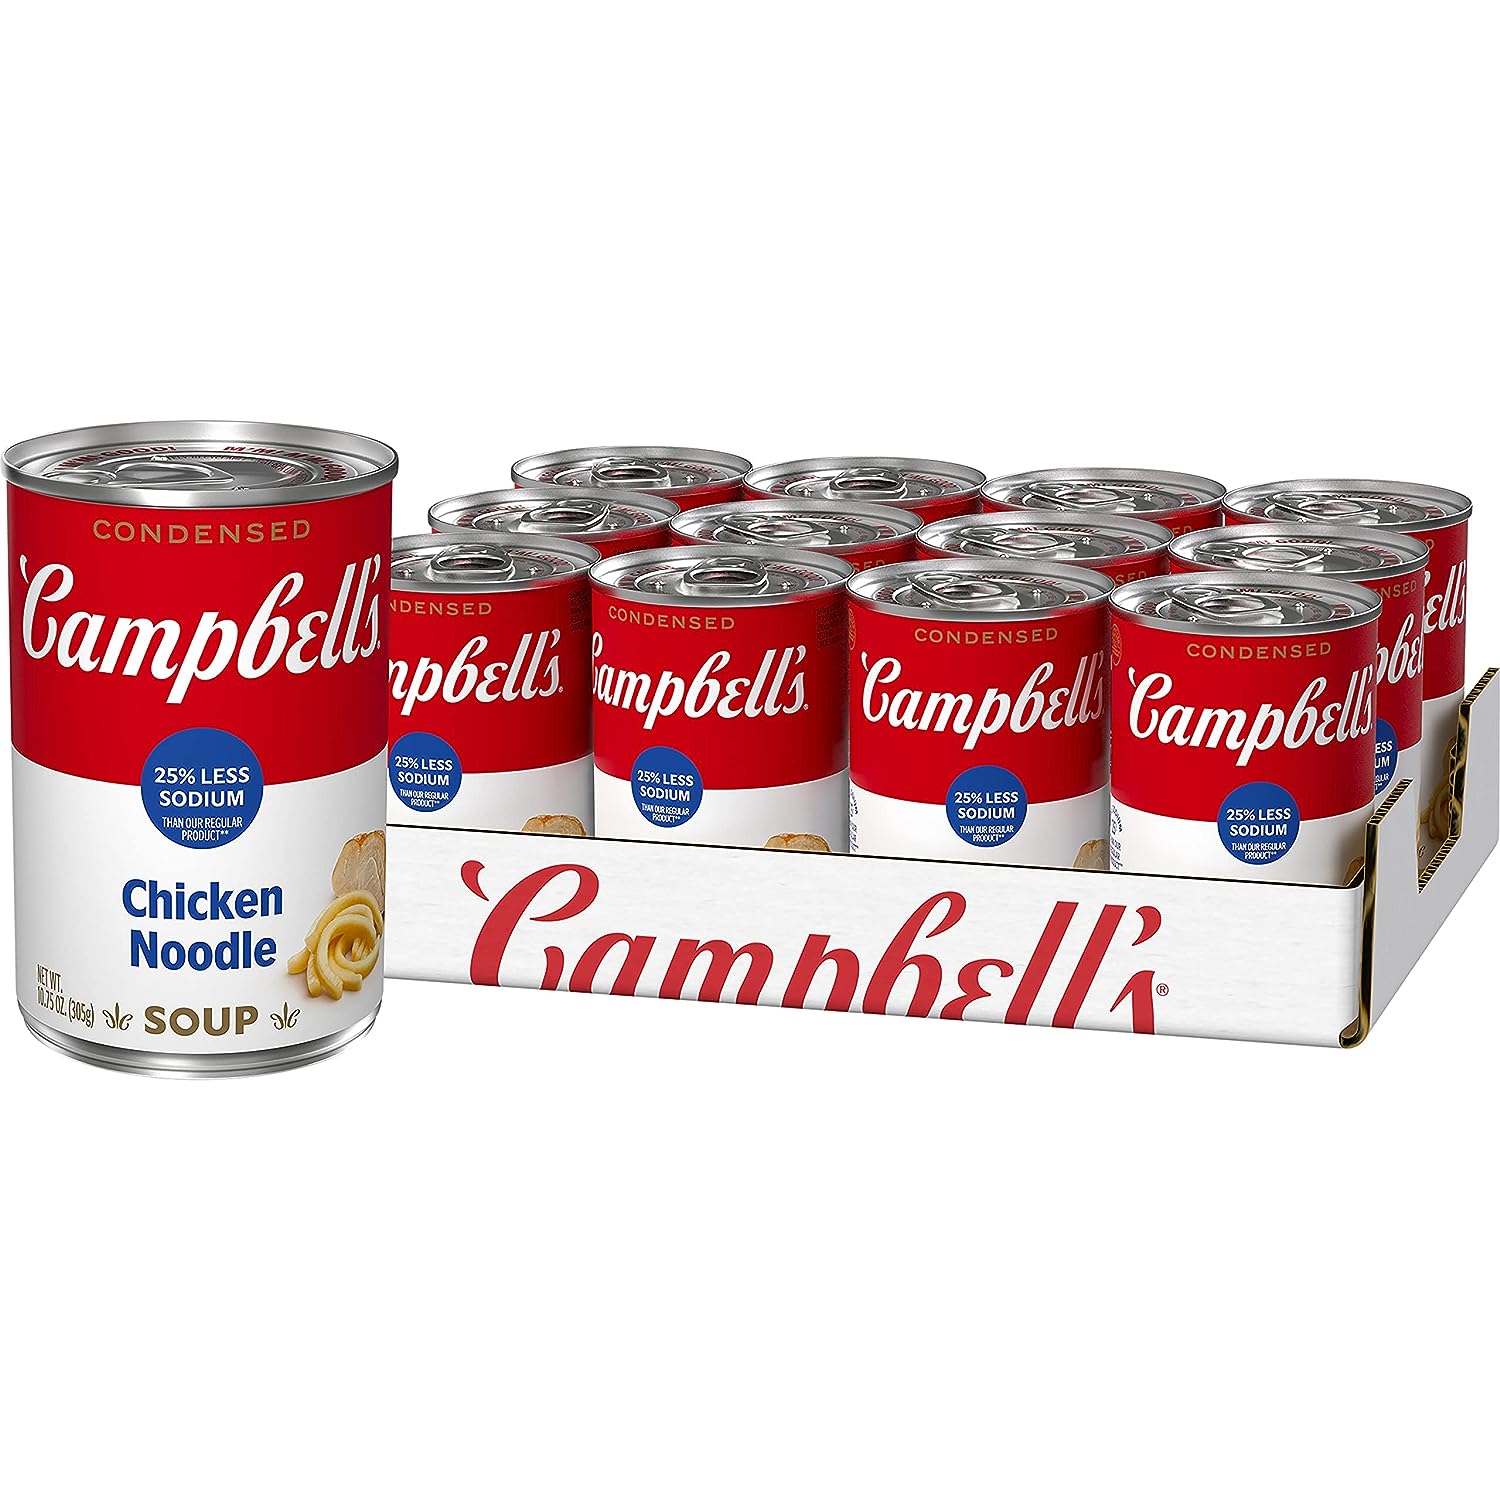 12-Pack 10.75-Oz Campbell's Condensed 25% Less Sodium Chicken Noodle Soup Cans $10.32 w/ S&S + Free Shipping w/ Prime or $35+